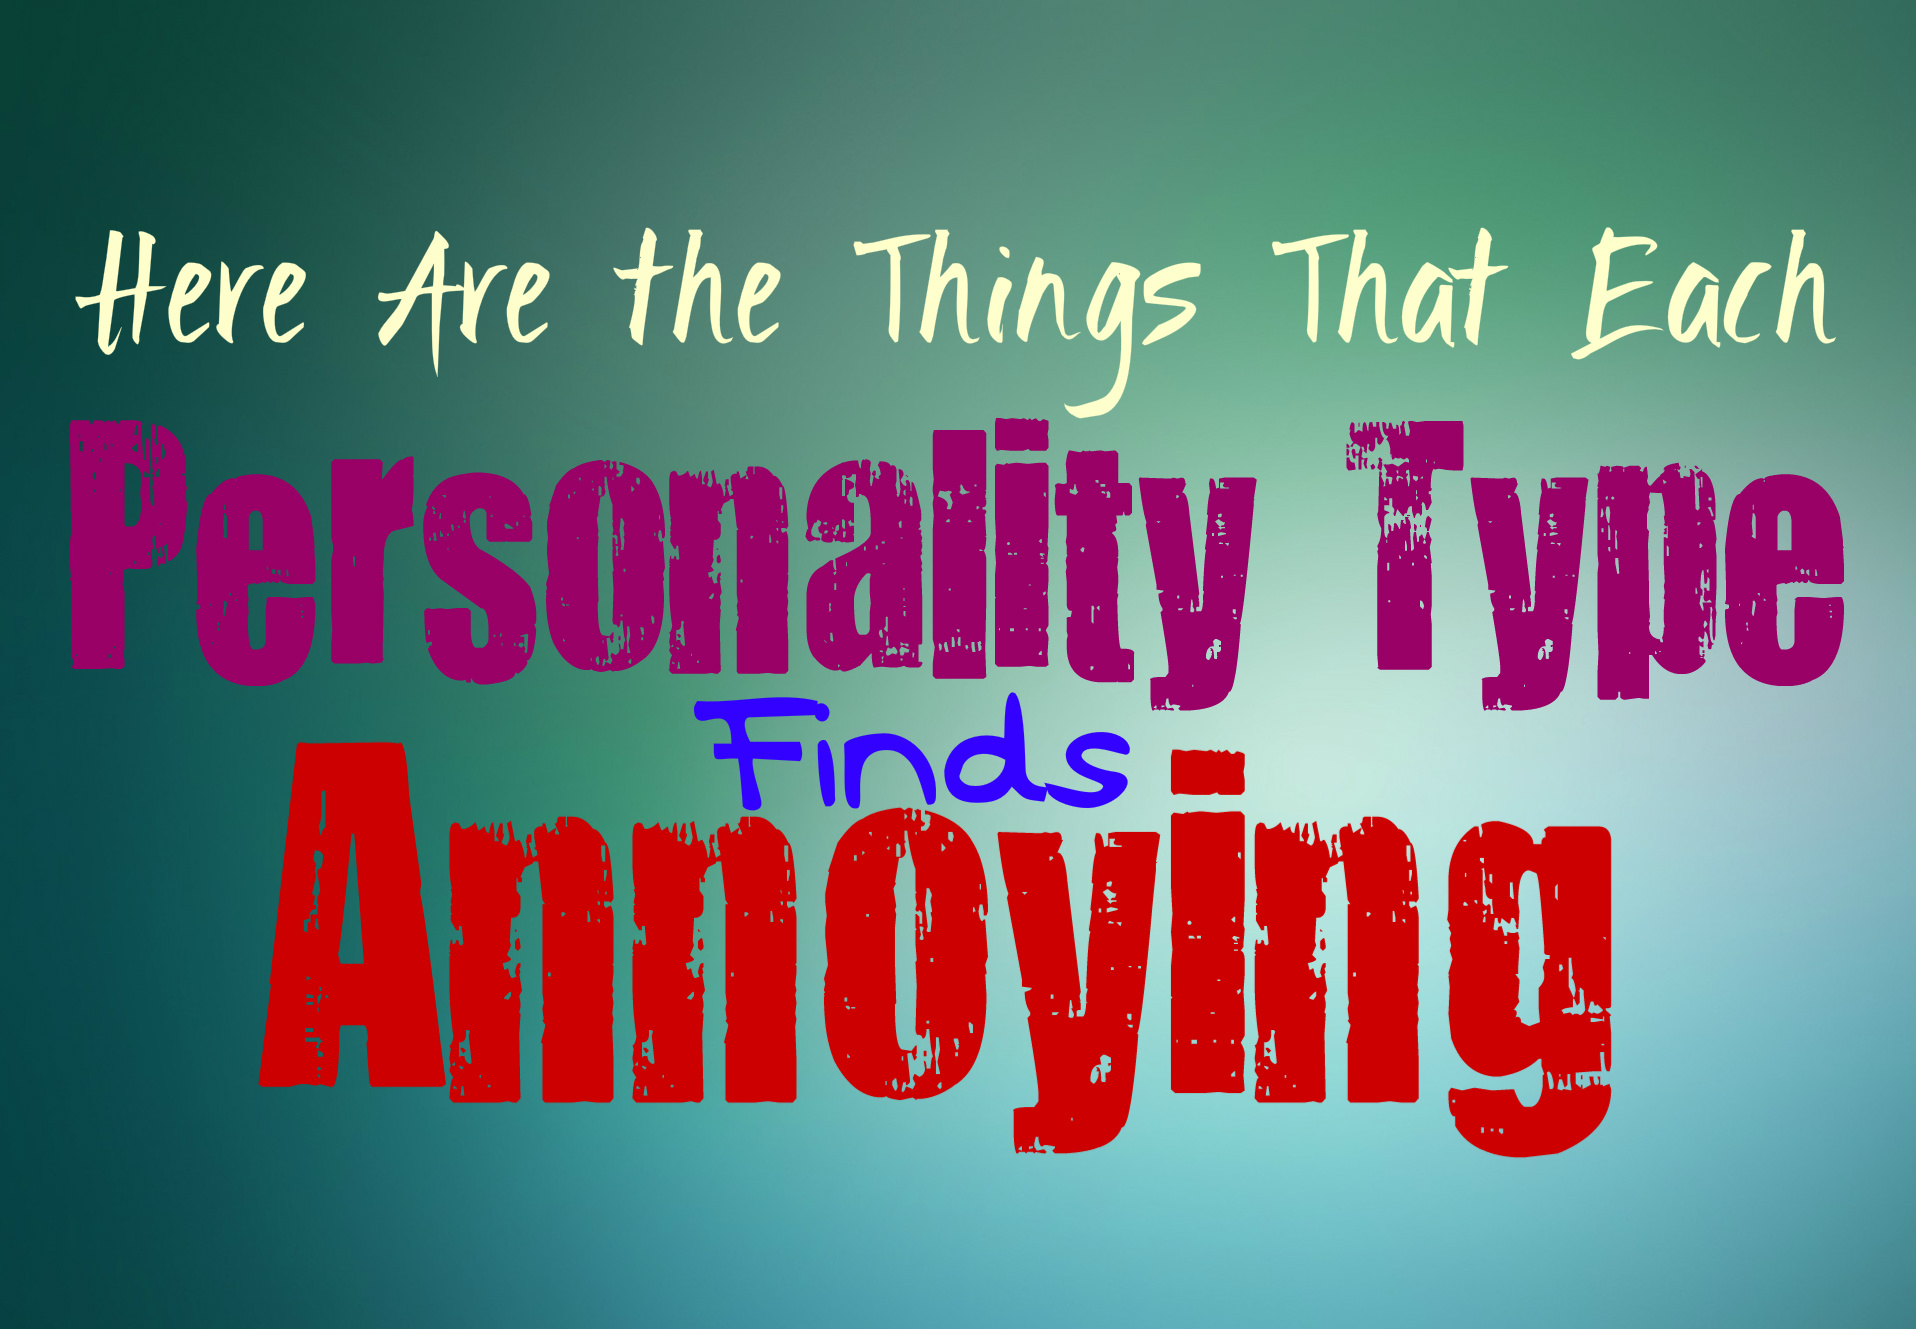 What You're Most Annoyed By, According to Myers Briggs